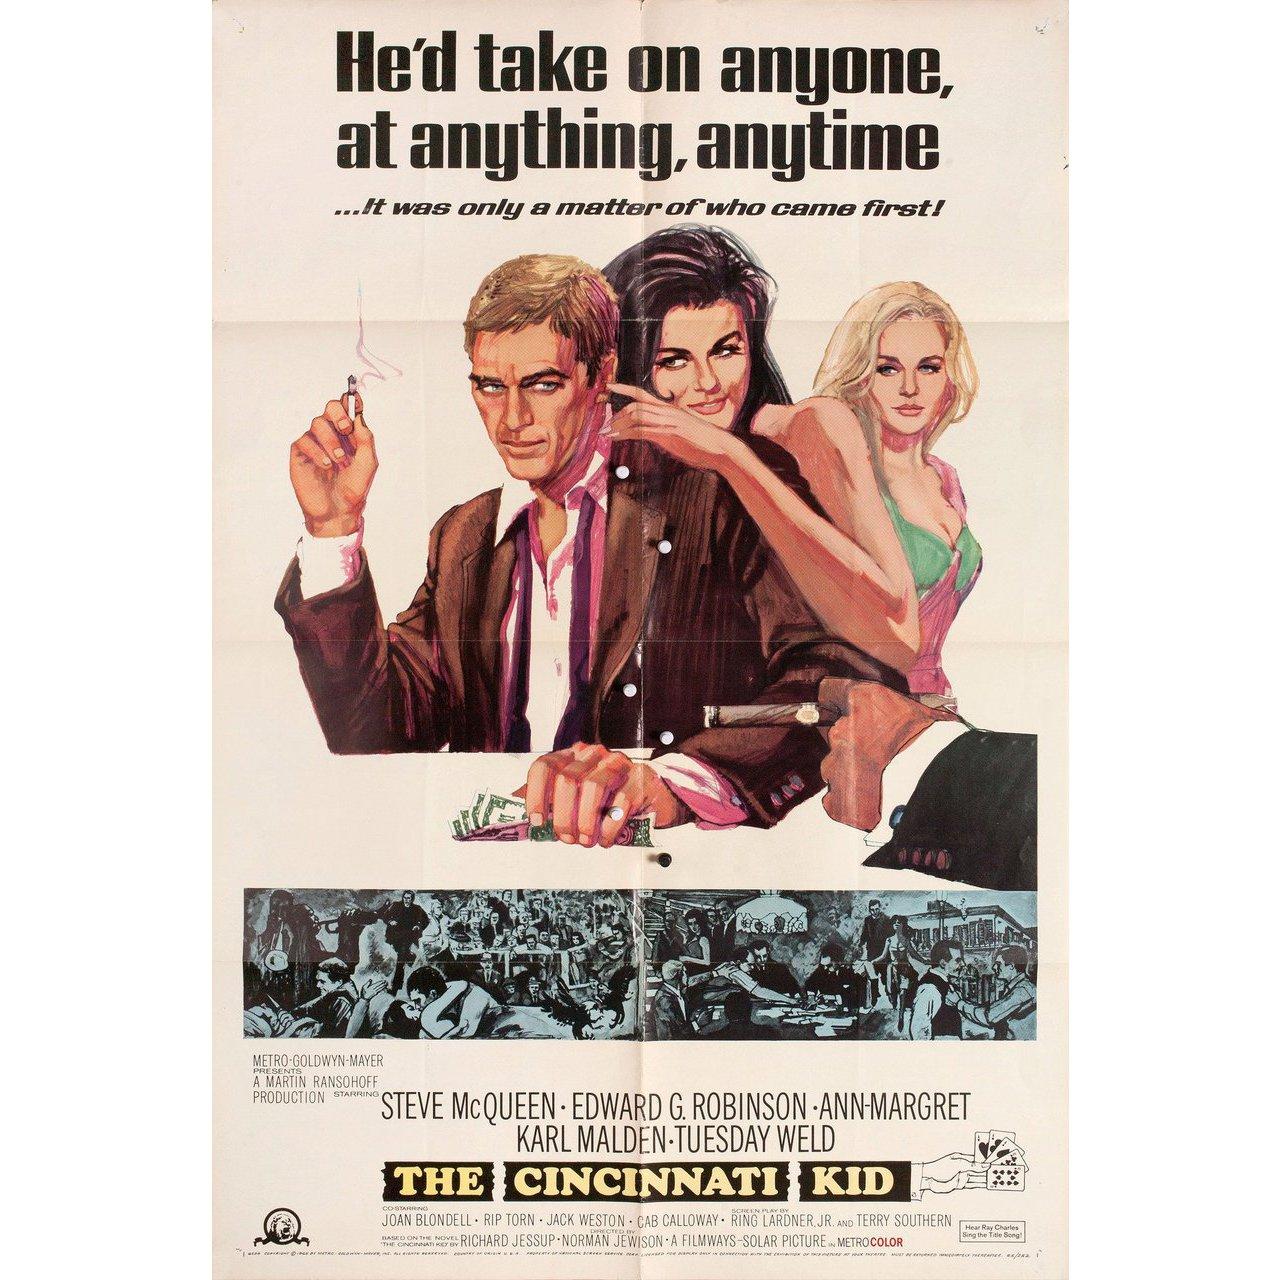 Original 1965 U.S. one sheet poster by Bob Peak for the film ‘The Cincinnati Kid’ directed by Norman Jewison with Steve McQueen / Ann-Margret / Karl Malden / Tuesday Weld. Very good-fine condition, folded. Many original posters were issued folded or